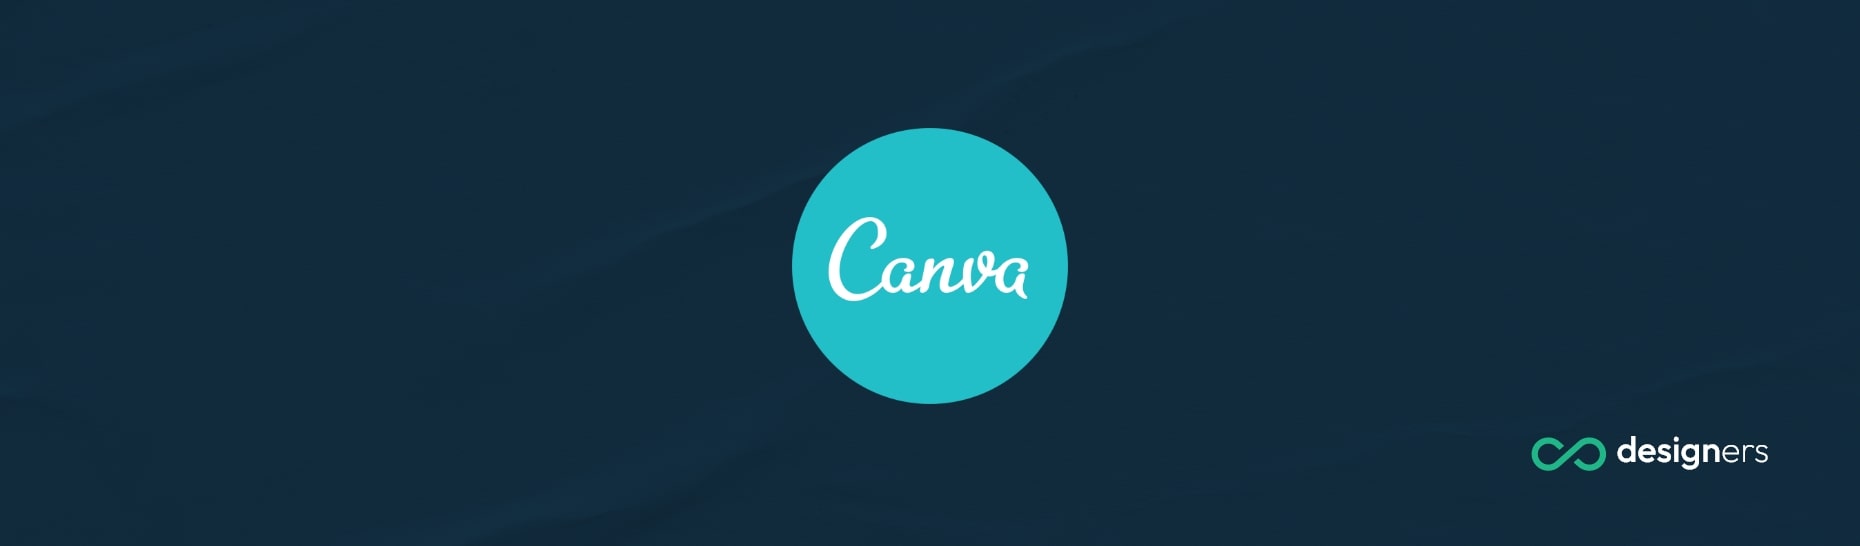 How Do I Get 300 DPI in Canva? | design tutorials and guides